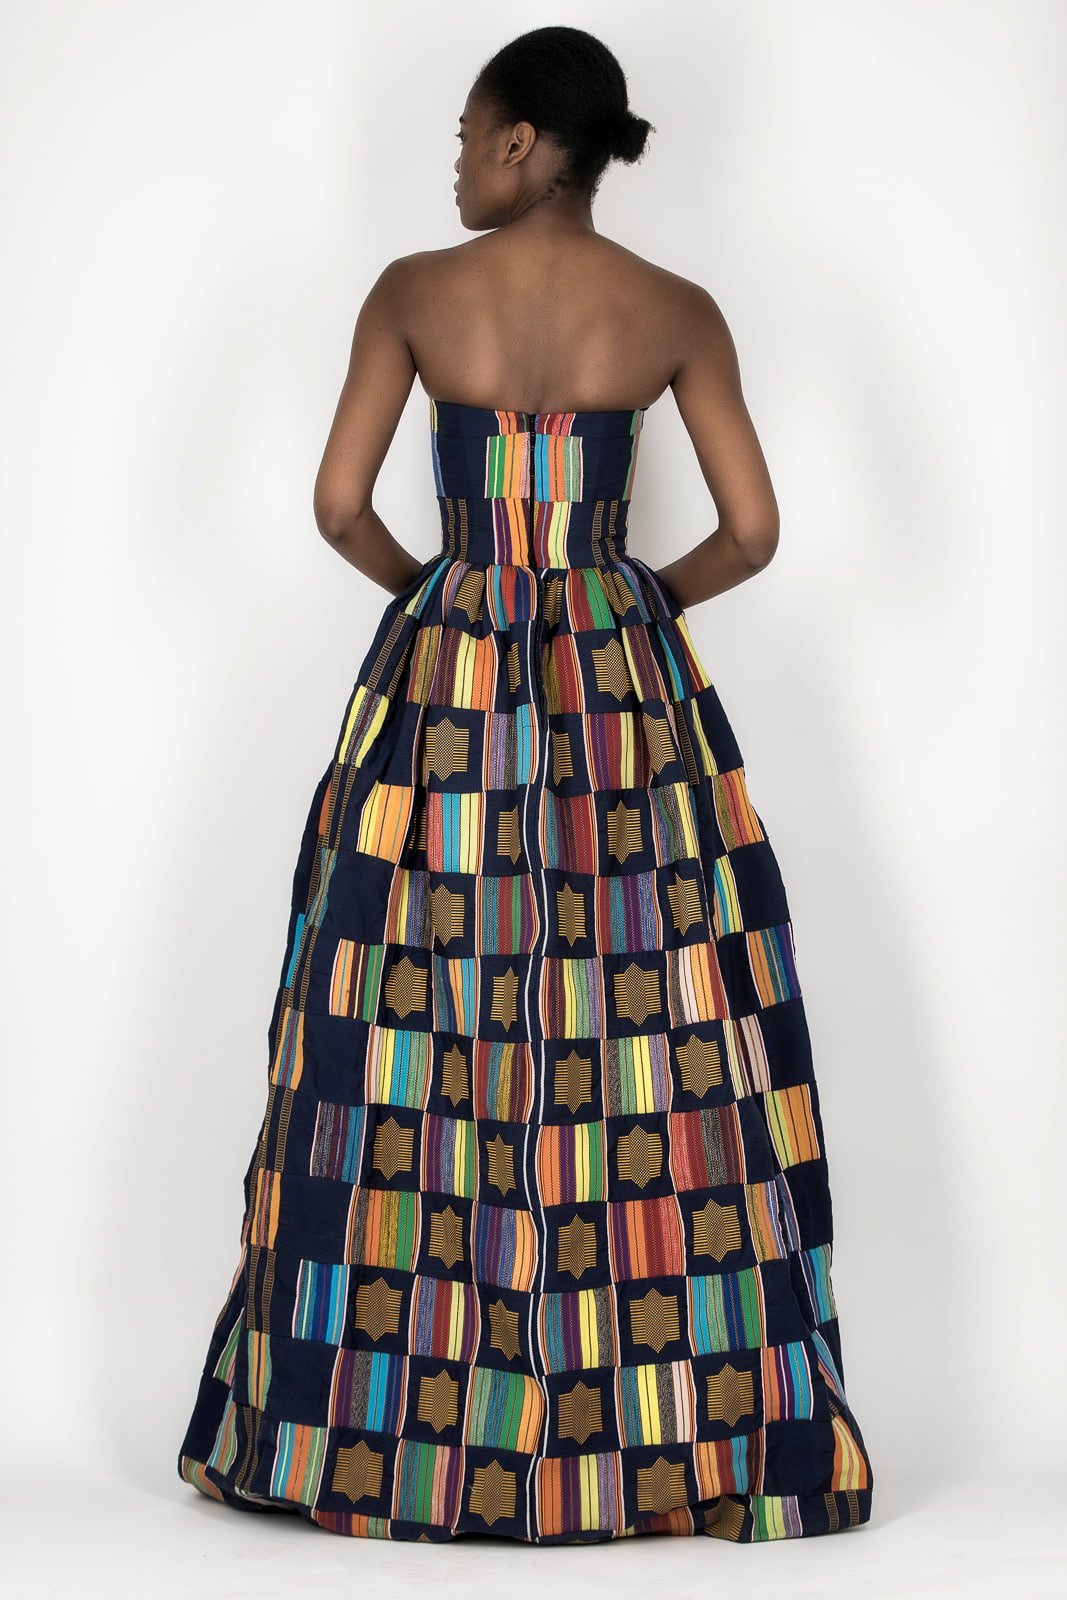 Strapless dress in Kente haute couture Imane Ayissi